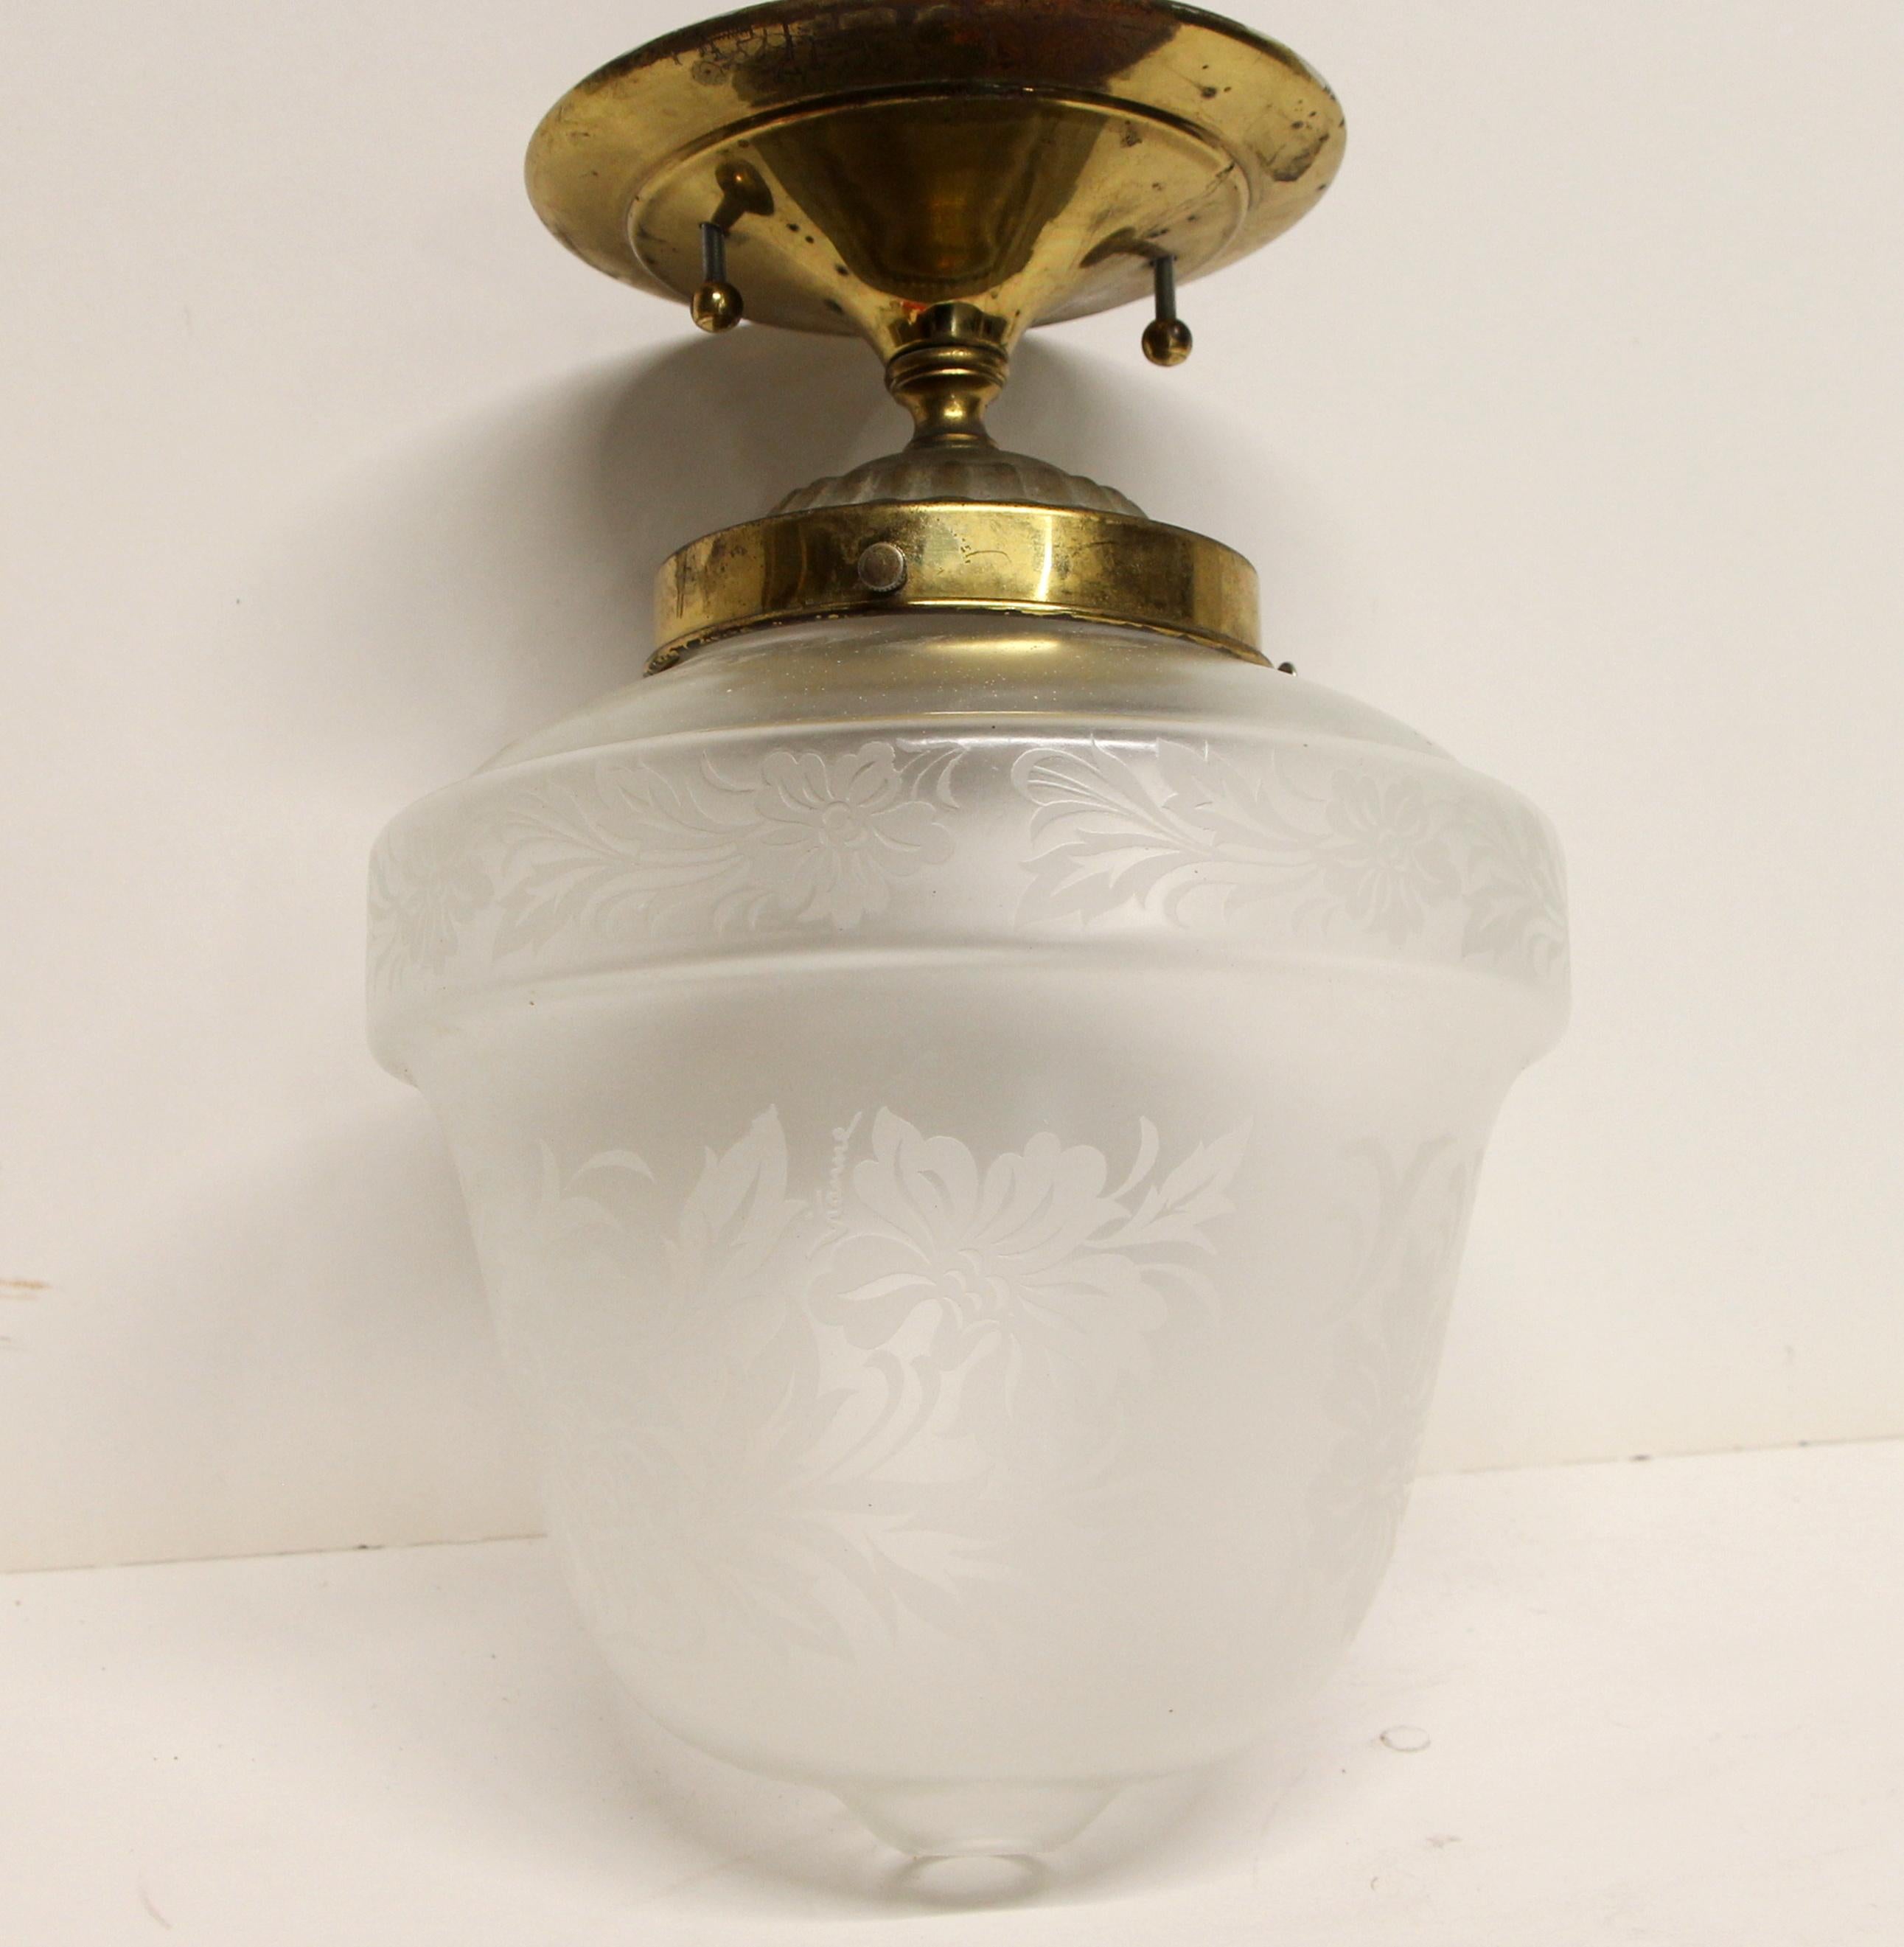 Simple acorn-shaped floral etched glass foyer or hallway light with a brass fitter from the prominent Waldorf Astoria Towers, circa 1940. Waldorf Astoria authenticity card included with your purchase. This can be viewed at one of our New York City